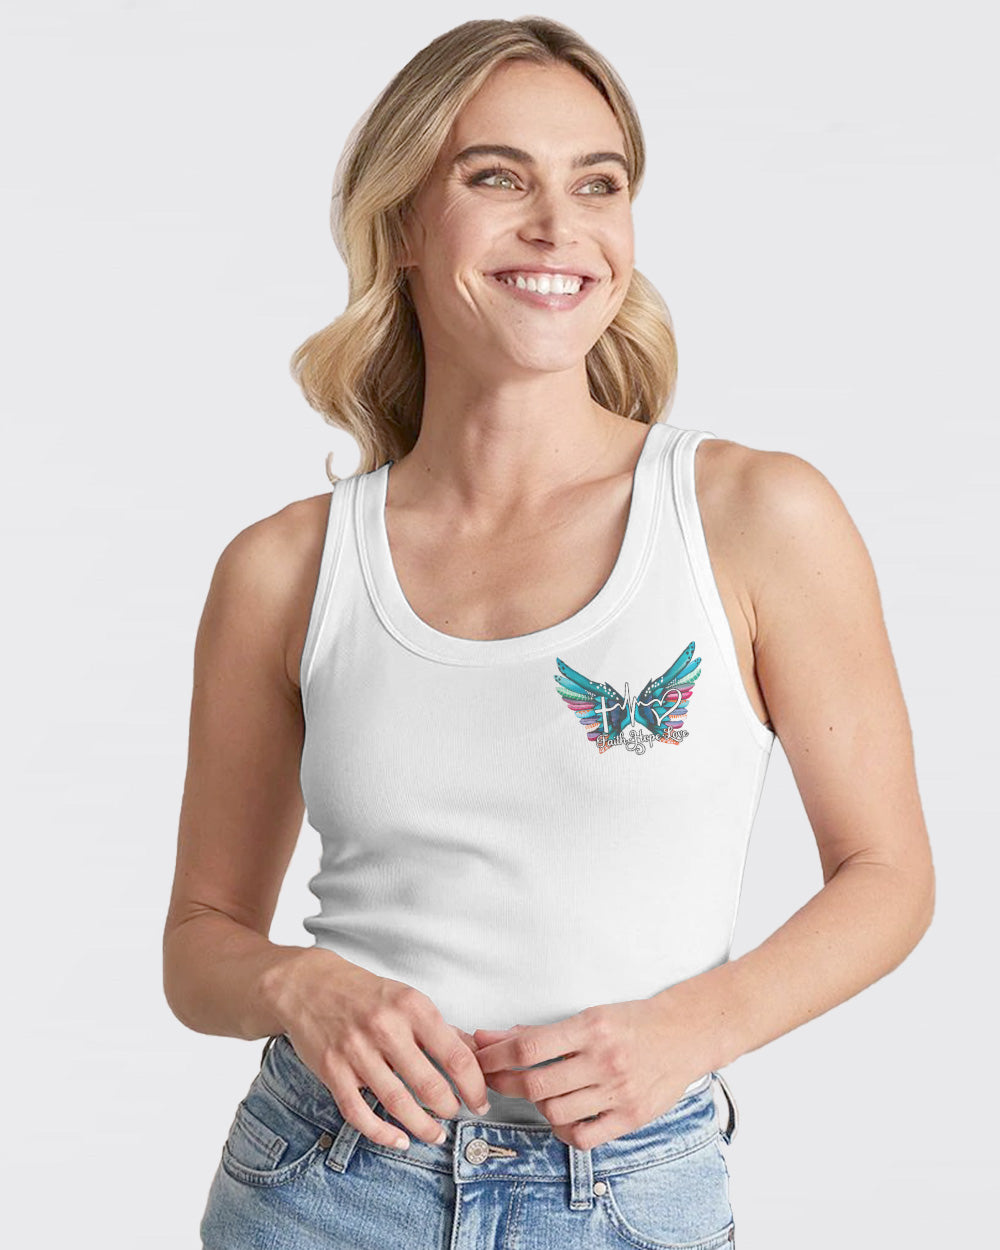 Faith Cross Painting Colorful New Wings Women's Christian Tanks